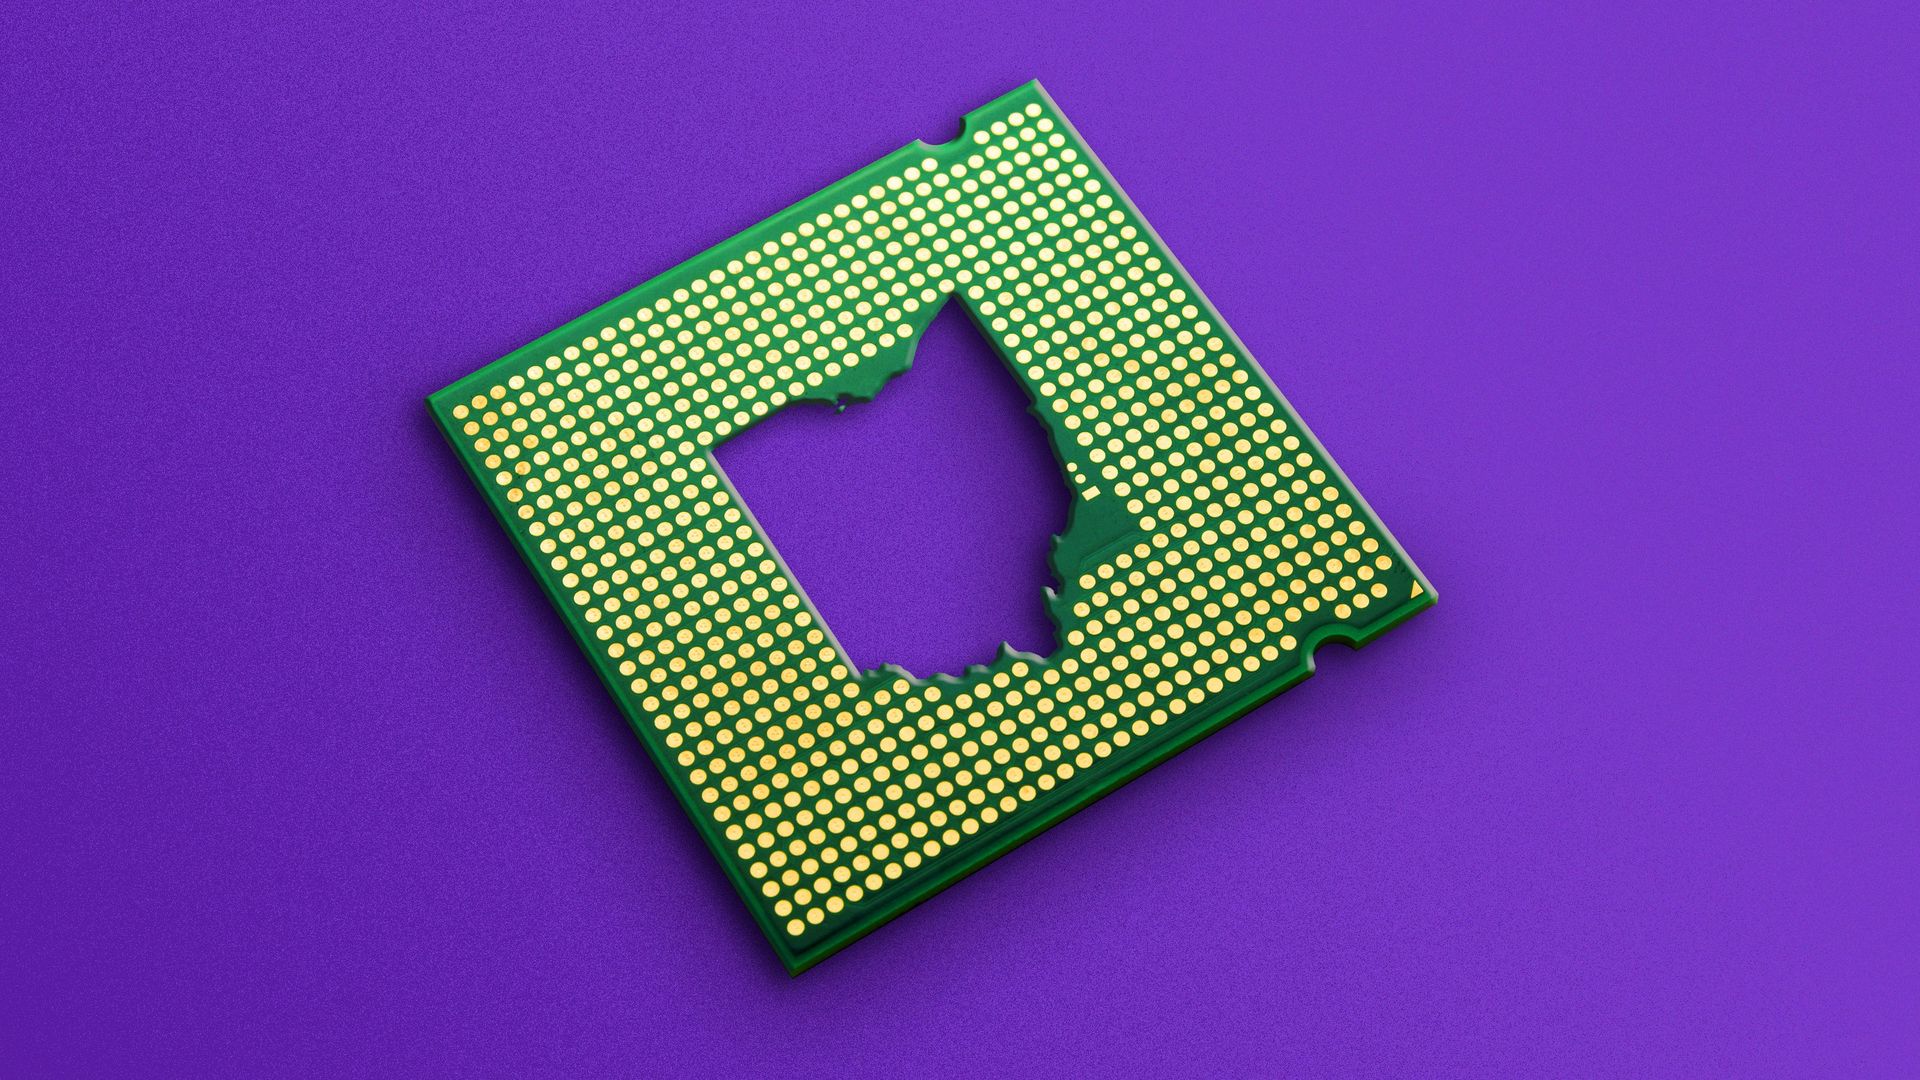 Illustration of a semiconductor chip with the shape of Ohio cut out of the center.